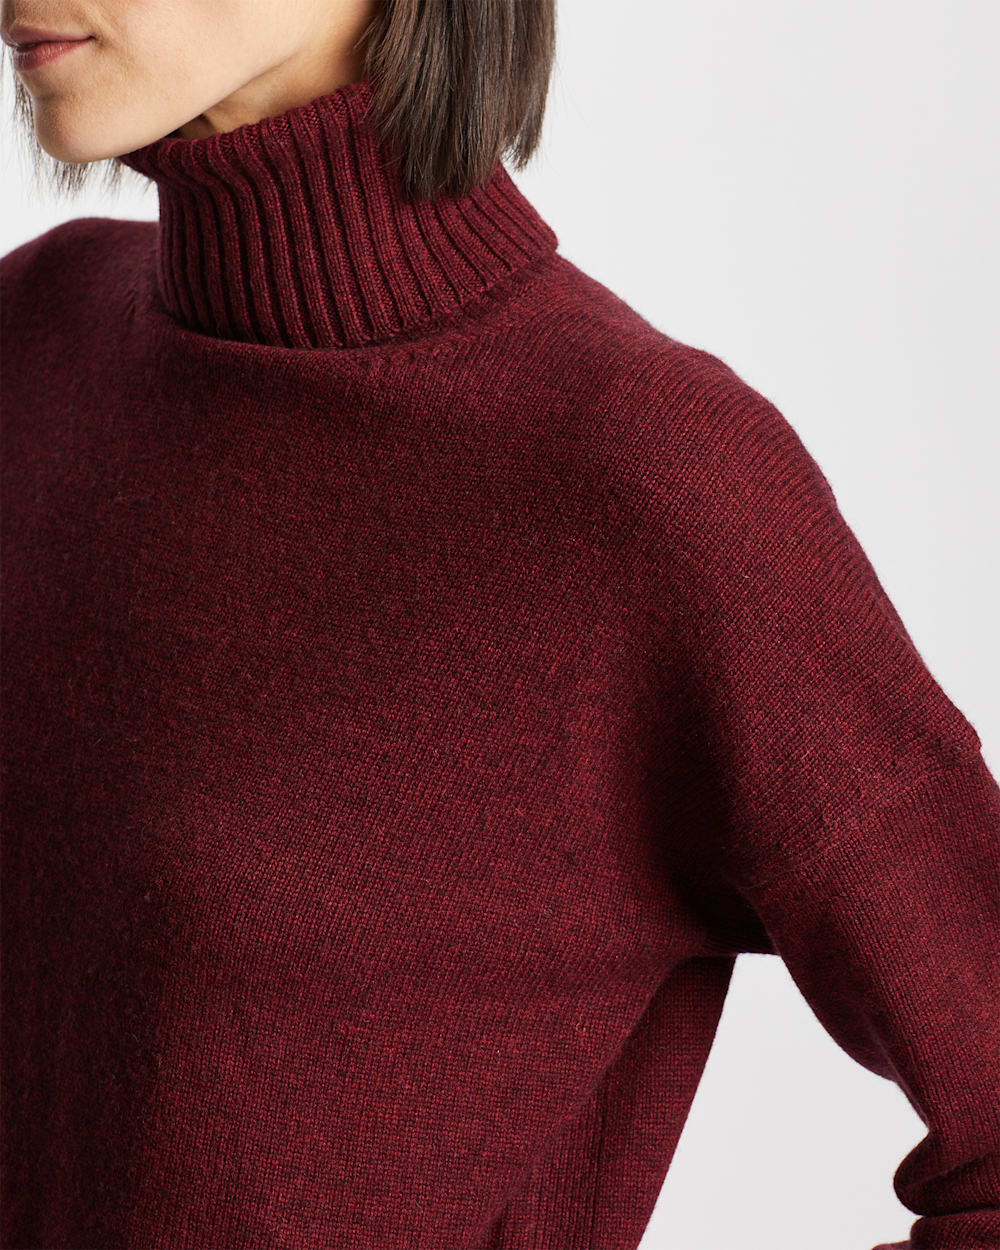 ALTERNATE VIEW OF WOMEN'S MERINO/CASHMERE OVERSIZED TURTLENECK IN BERRY PRESERVE image number 2